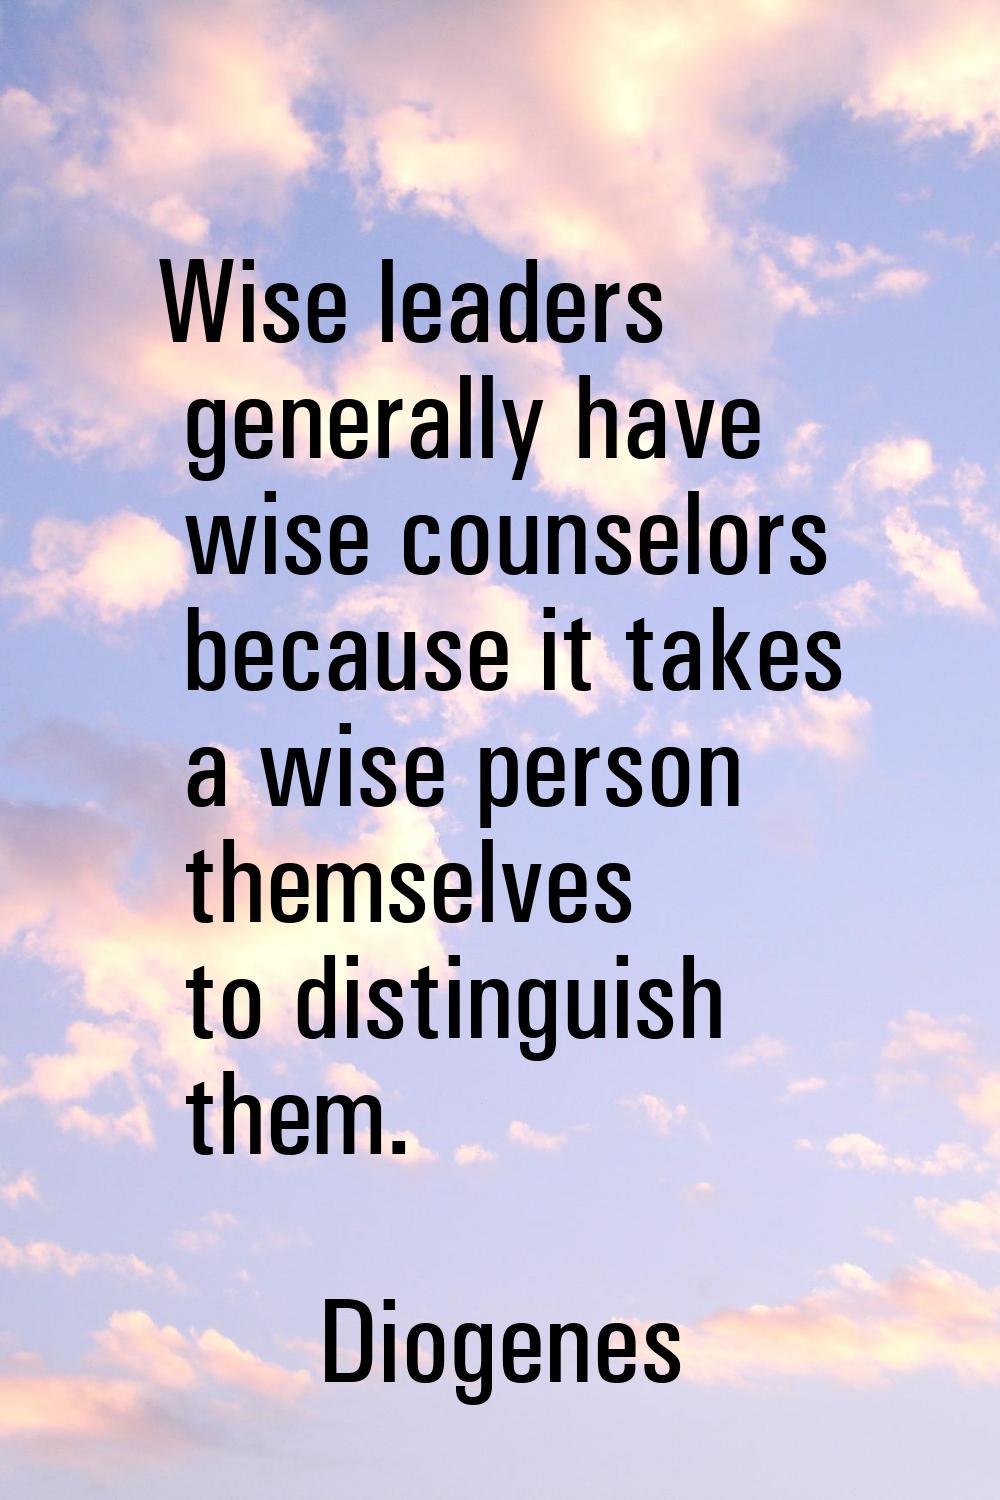 Wise leaders generally have wise counselors because it takes a wise person themselves to distinguis